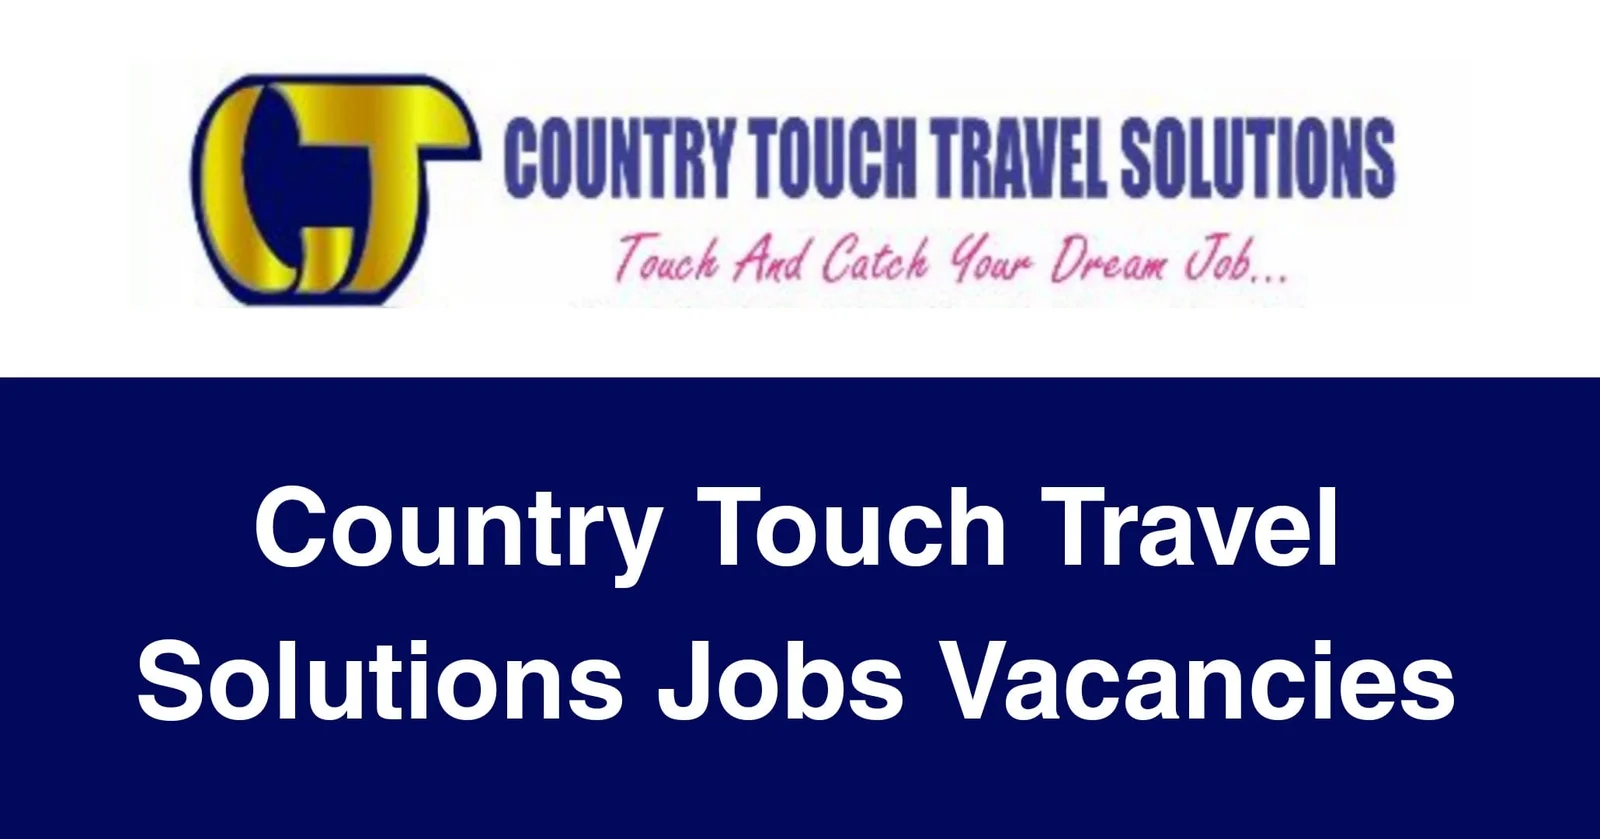 Country Touch Travel Solutions Jobs Vacancies